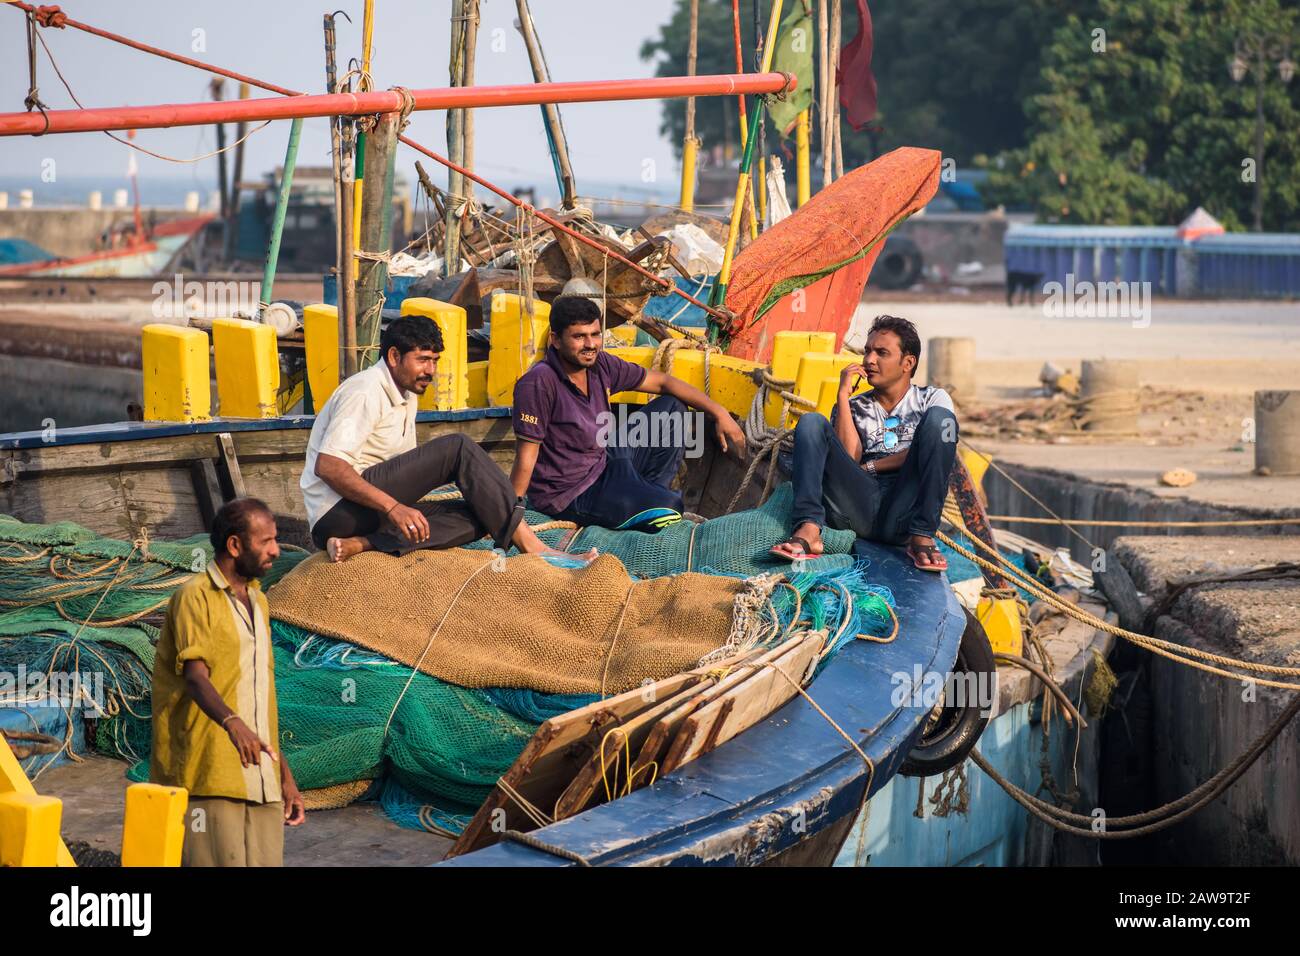 Diu, India - December 2018: Fishermen idle and chat on a colorful boat by the pier in the island of Diu. Stock Photo